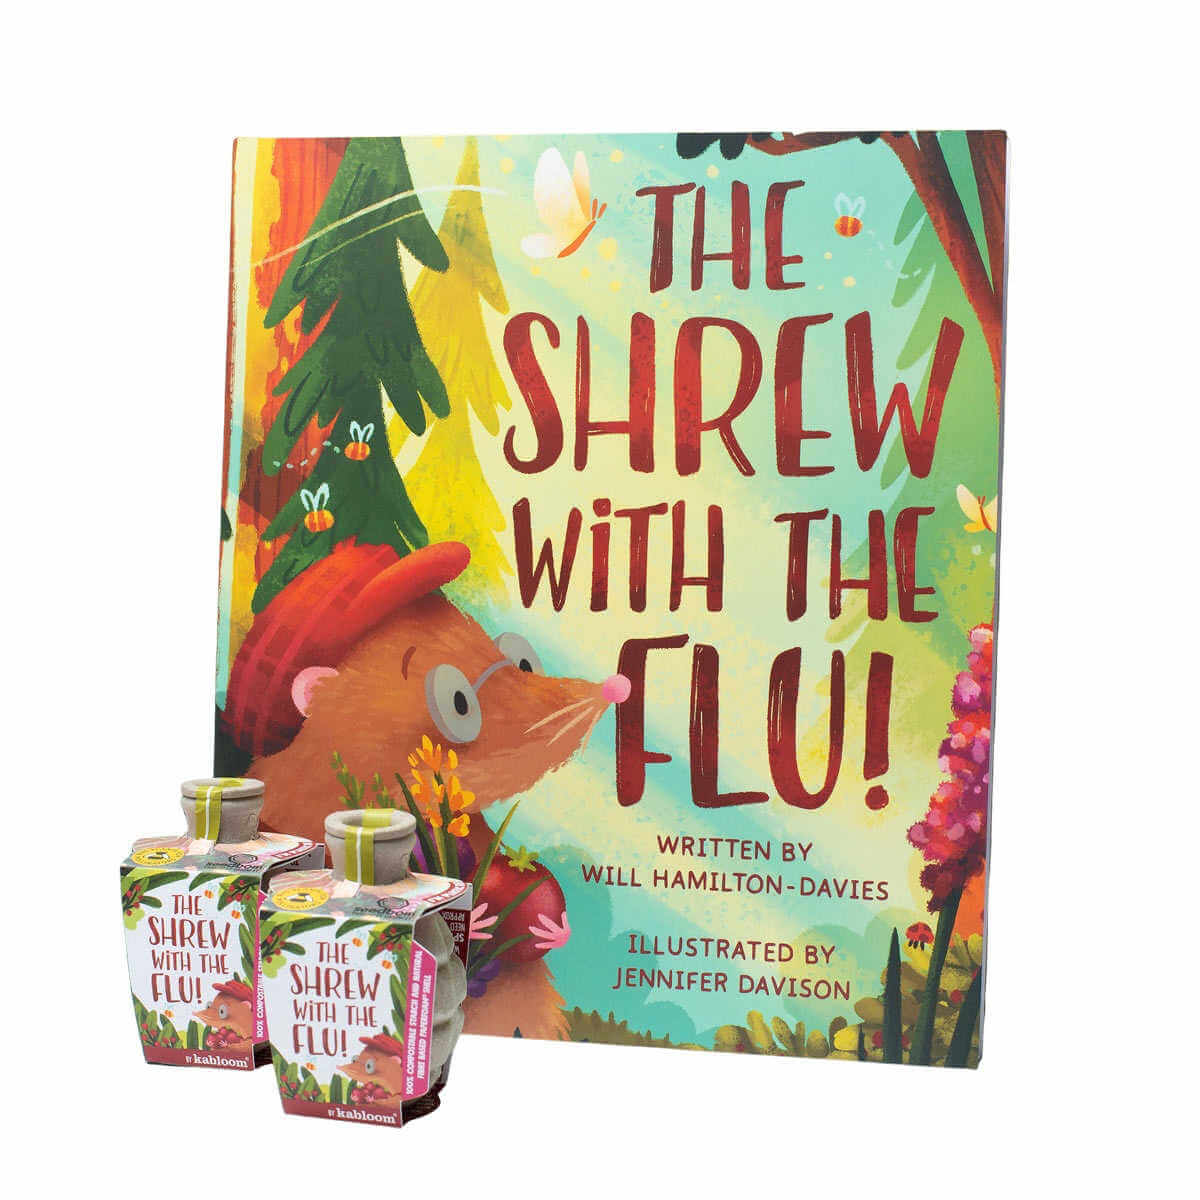 Kabloom the shrew with the flu sustainable book and seedbom children's gift set